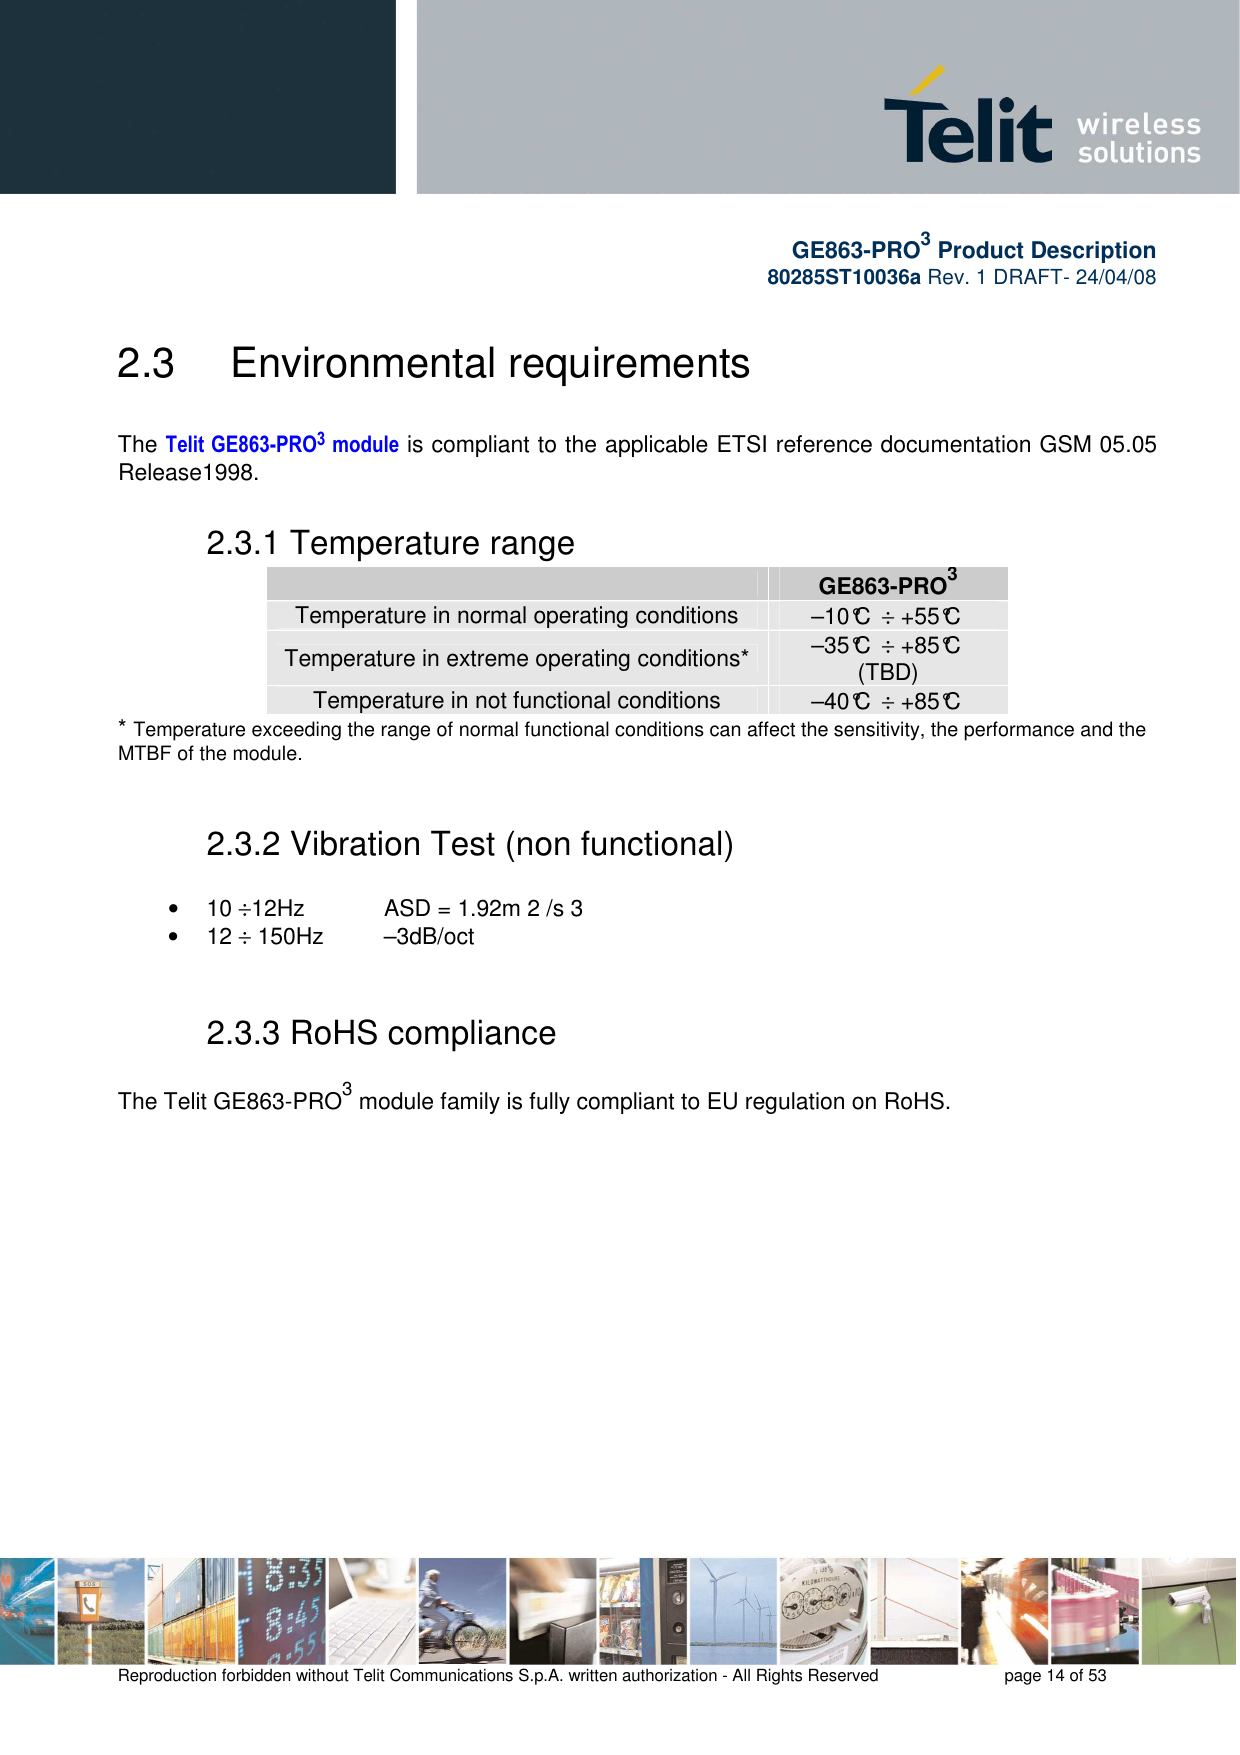       GE863-PRO3 Product Description 80285ST10036a Rev. 1 DRAFT- 24/04/08    Reproduction forbidden without Telit Communications S.p.A. written authorization - All Rights Reserved    page 14 of 53  2.3   Environmental requirements  The Telit GE863-PRO3 module is compliant to the applicable ETSI reference documentation GSM 05.05 Release1998. 2.3.1 Temperature range  GE863-PRO3 Temperature in normal operating conditions  –10°C  ÷ +55°C Temperature in extreme operating conditions*  –35°C  ÷ +85°C (TBD) Temperature in not functional conditions  –40°C  ÷ +85°C * Temperature exceeding the range of normal functional conditions can affect the sensitivity, the performance and the MTBF of the module.  2.3.2 Vibration Test (non functional)  •  10 ÷12Hz      ASD = 1.92m 2 /s 3 •  12 ÷ 150Hz  –3dB/oct  2.3.3 RoHS compliance  The Telit GE863-PRO3 module family is fully compliant to EU regulation on RoHS.  